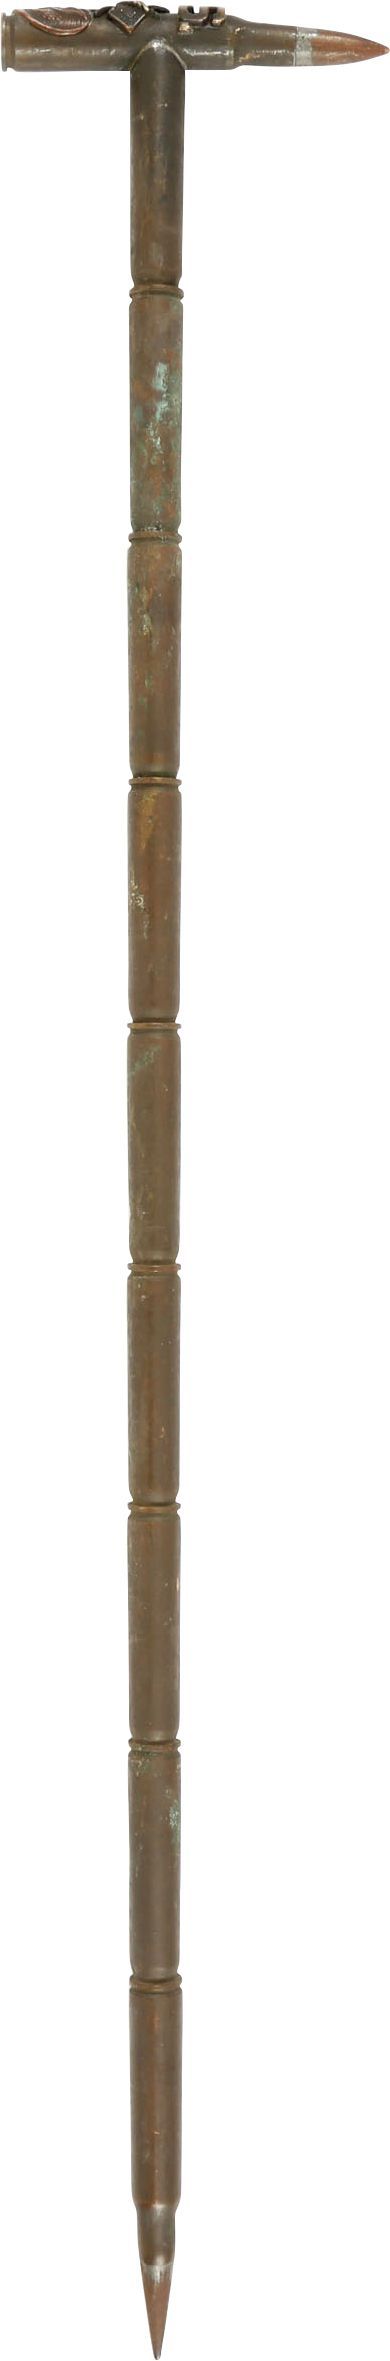 WWI TRENCH ART SWAGGER STICK - Fagan Arms